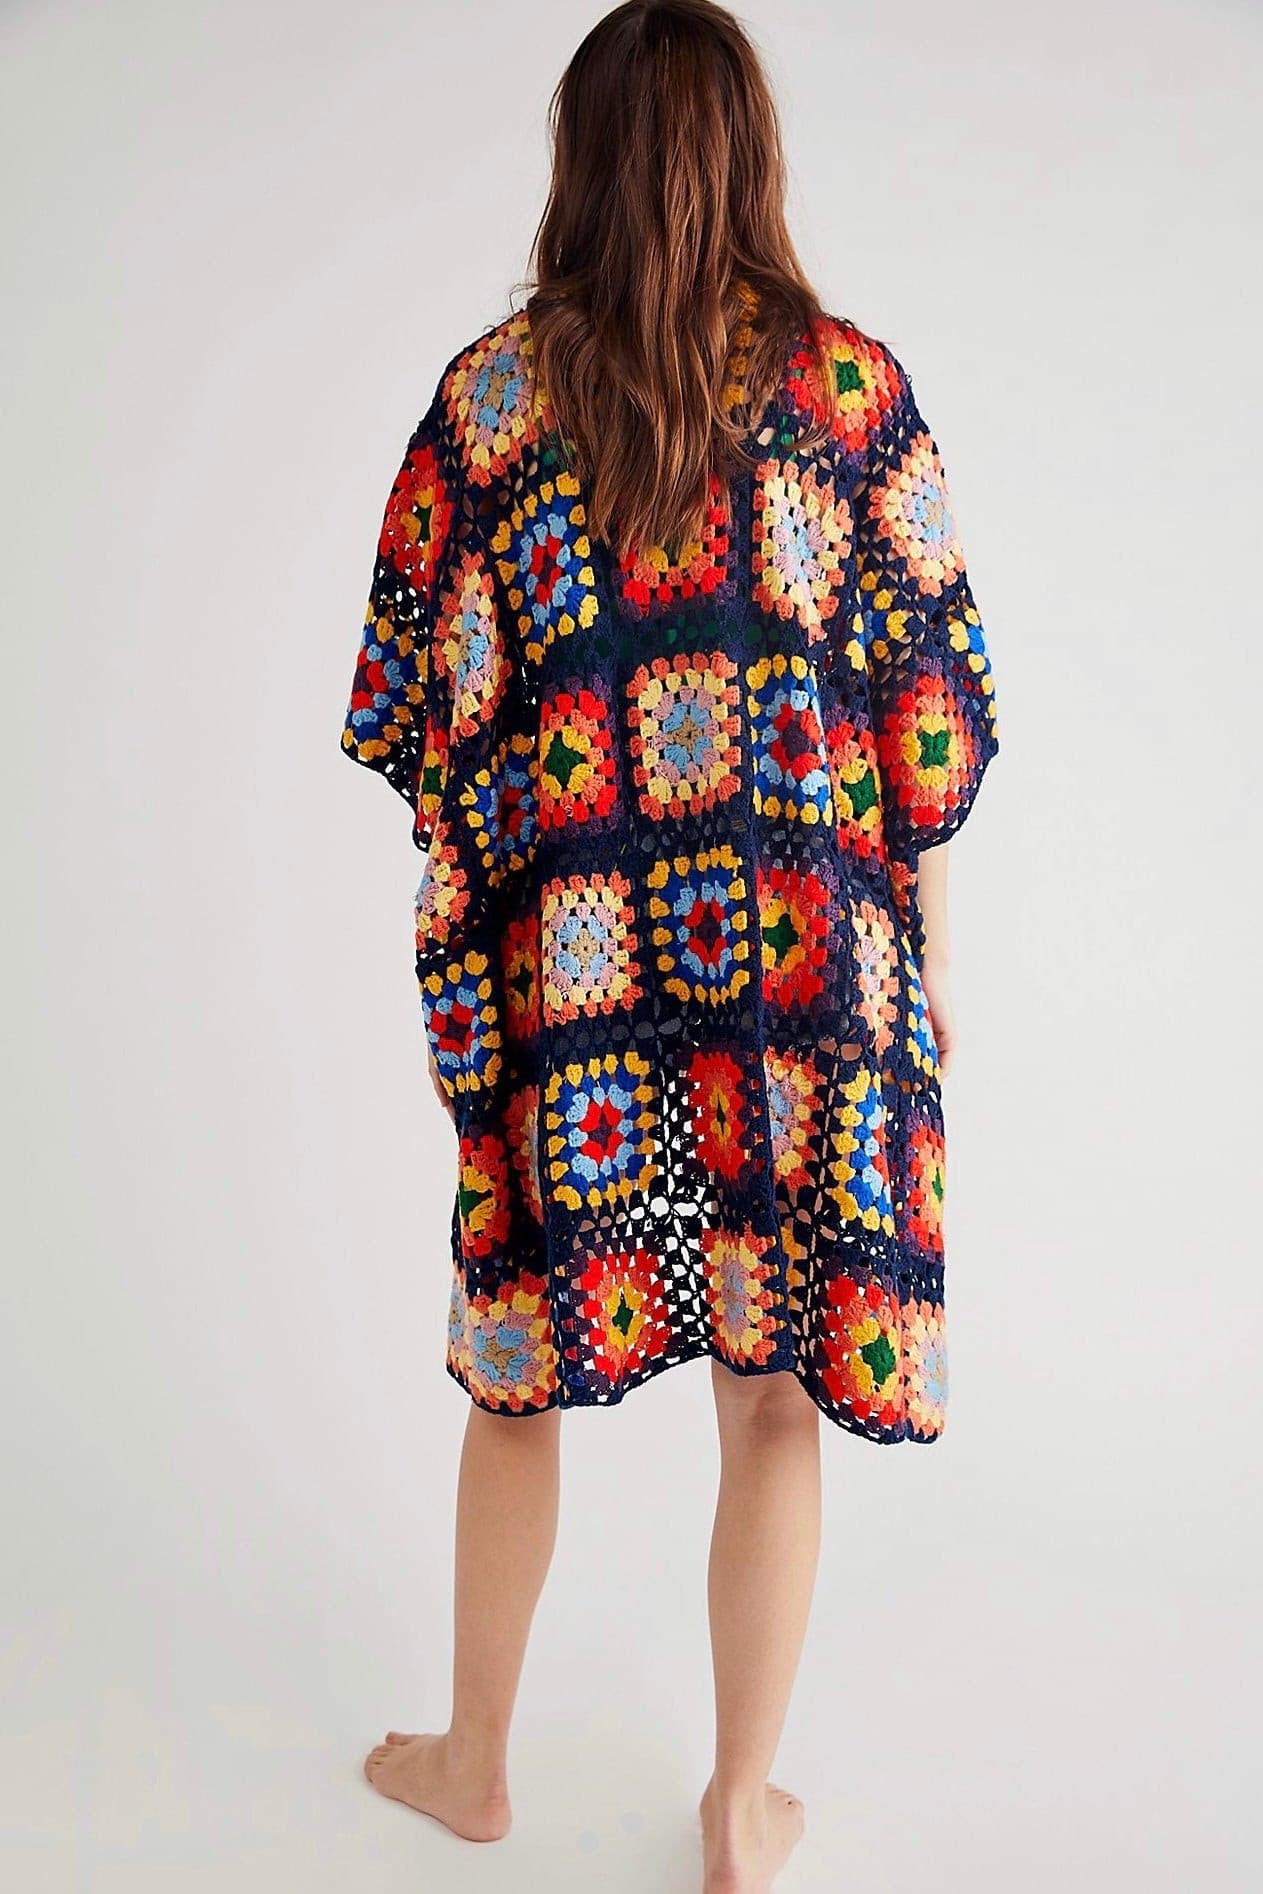 NONI HAND CROCHET PONCHO X FREE PEOPLE - MOMO STUDIO BERLIN - Berlin Concept Store - sustainable & ethical fashion